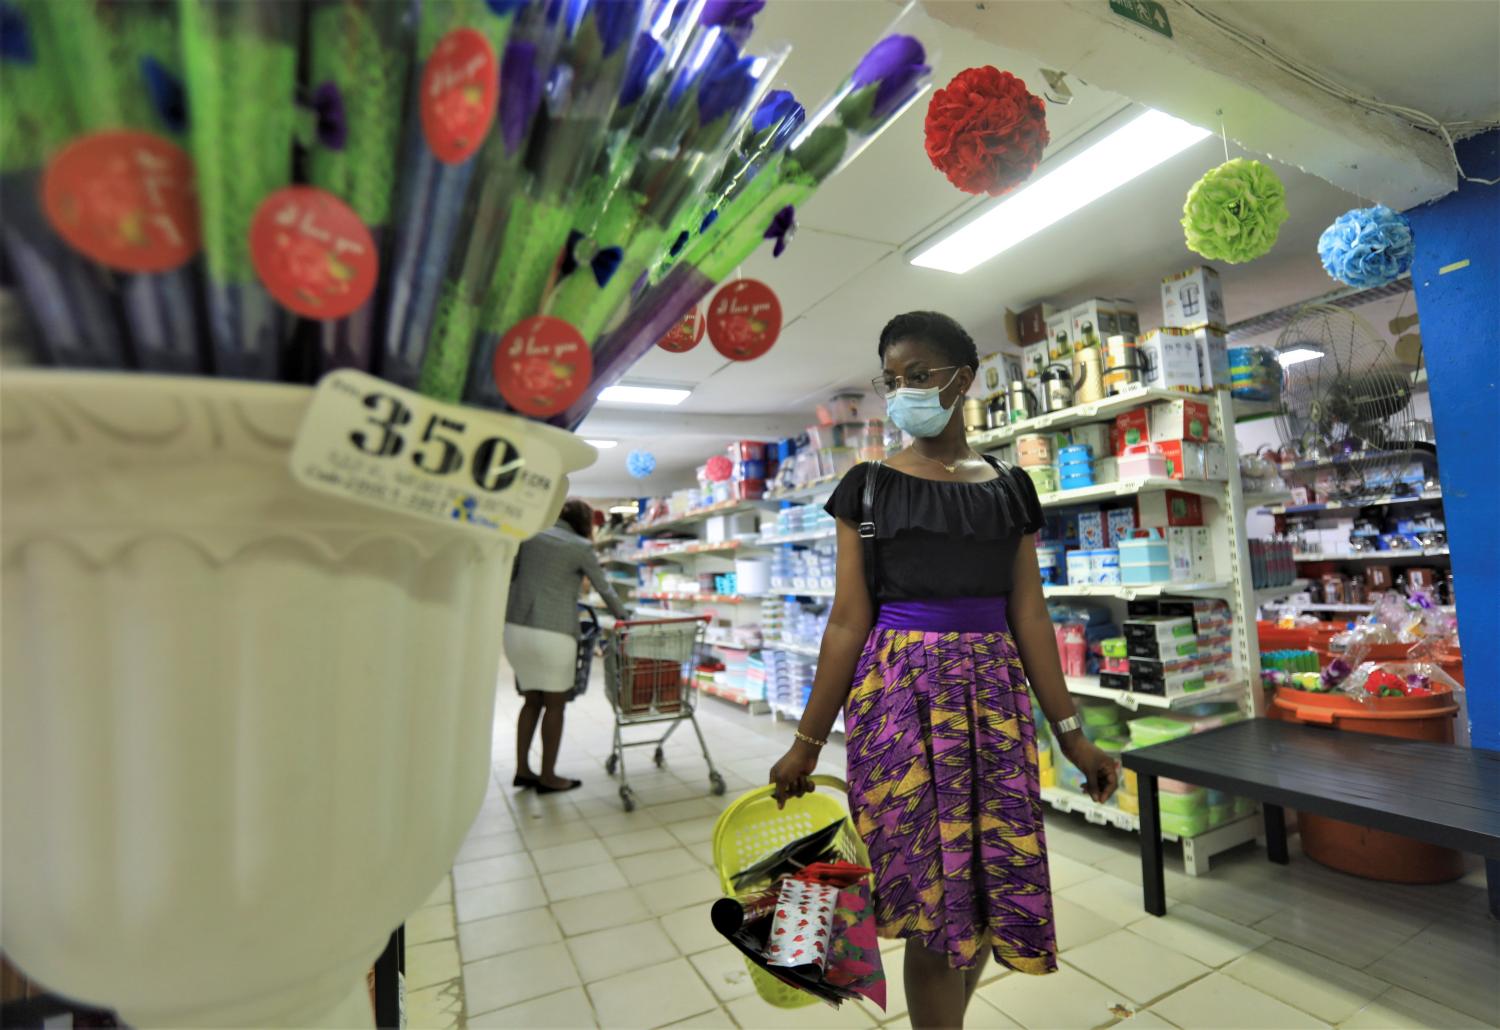 A woman wearing a protective face mask shops at Chic Shops supermarket, amid the coronavirus disease (COVID-19) outbreak at Adjame, a neighbourhood of Abidjan, Ivory Coast May 28, 2020. REUTERS/Thierry Gouegnon